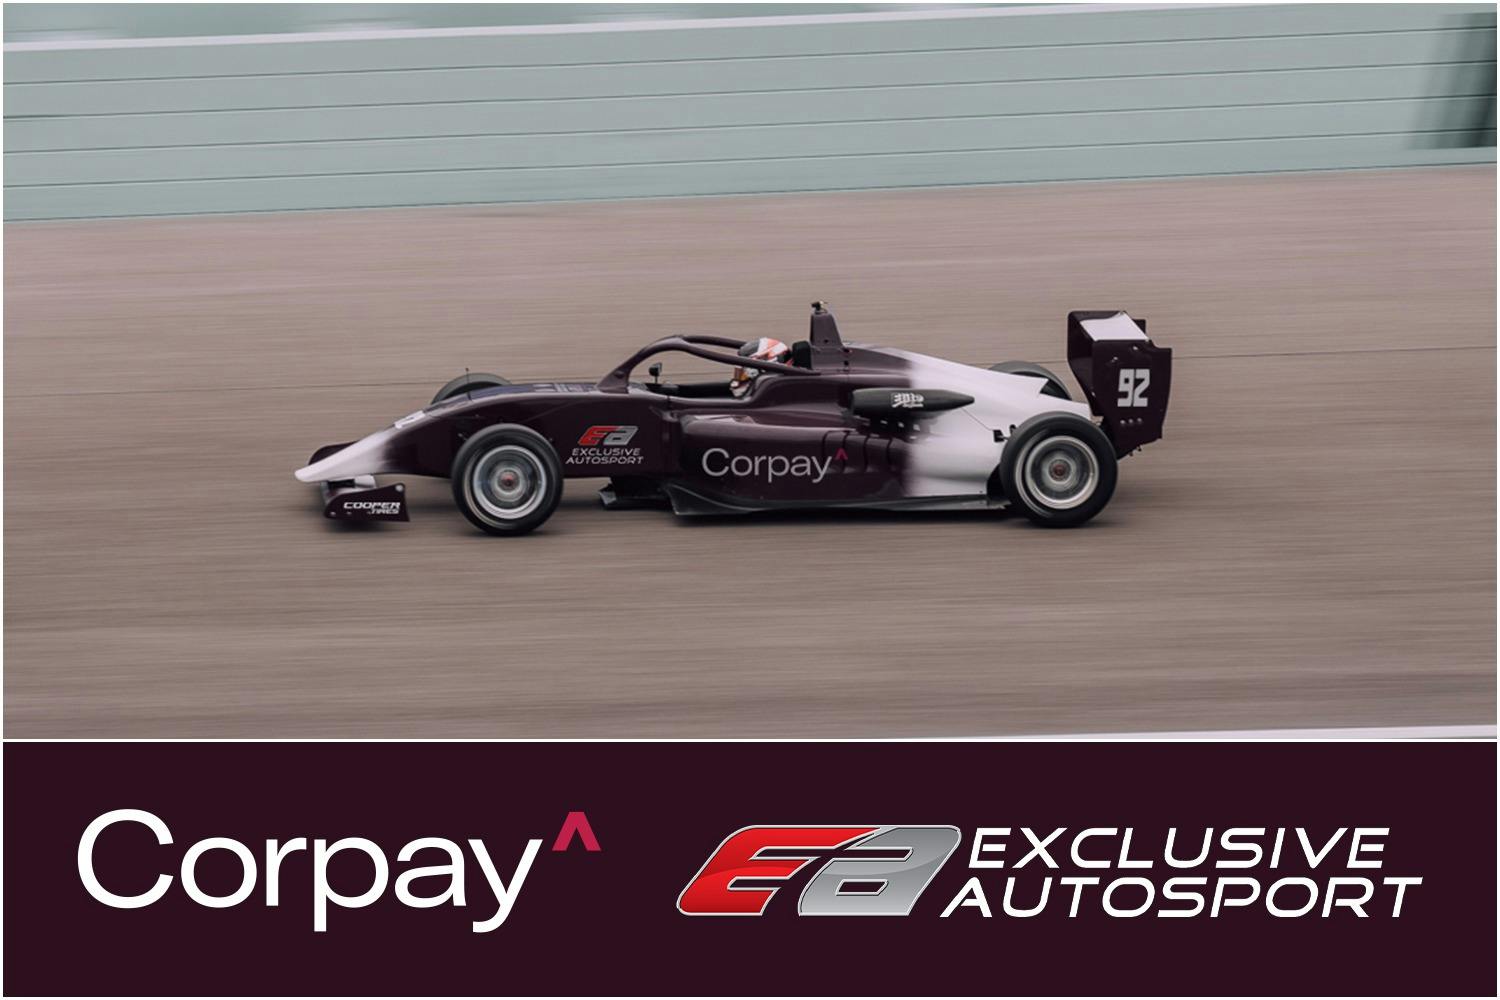 Corpay Cross-Border Solutions will expand its sponsorship with Exclusive Autosport for the 2022 season (Photo: Corbin Taylor)